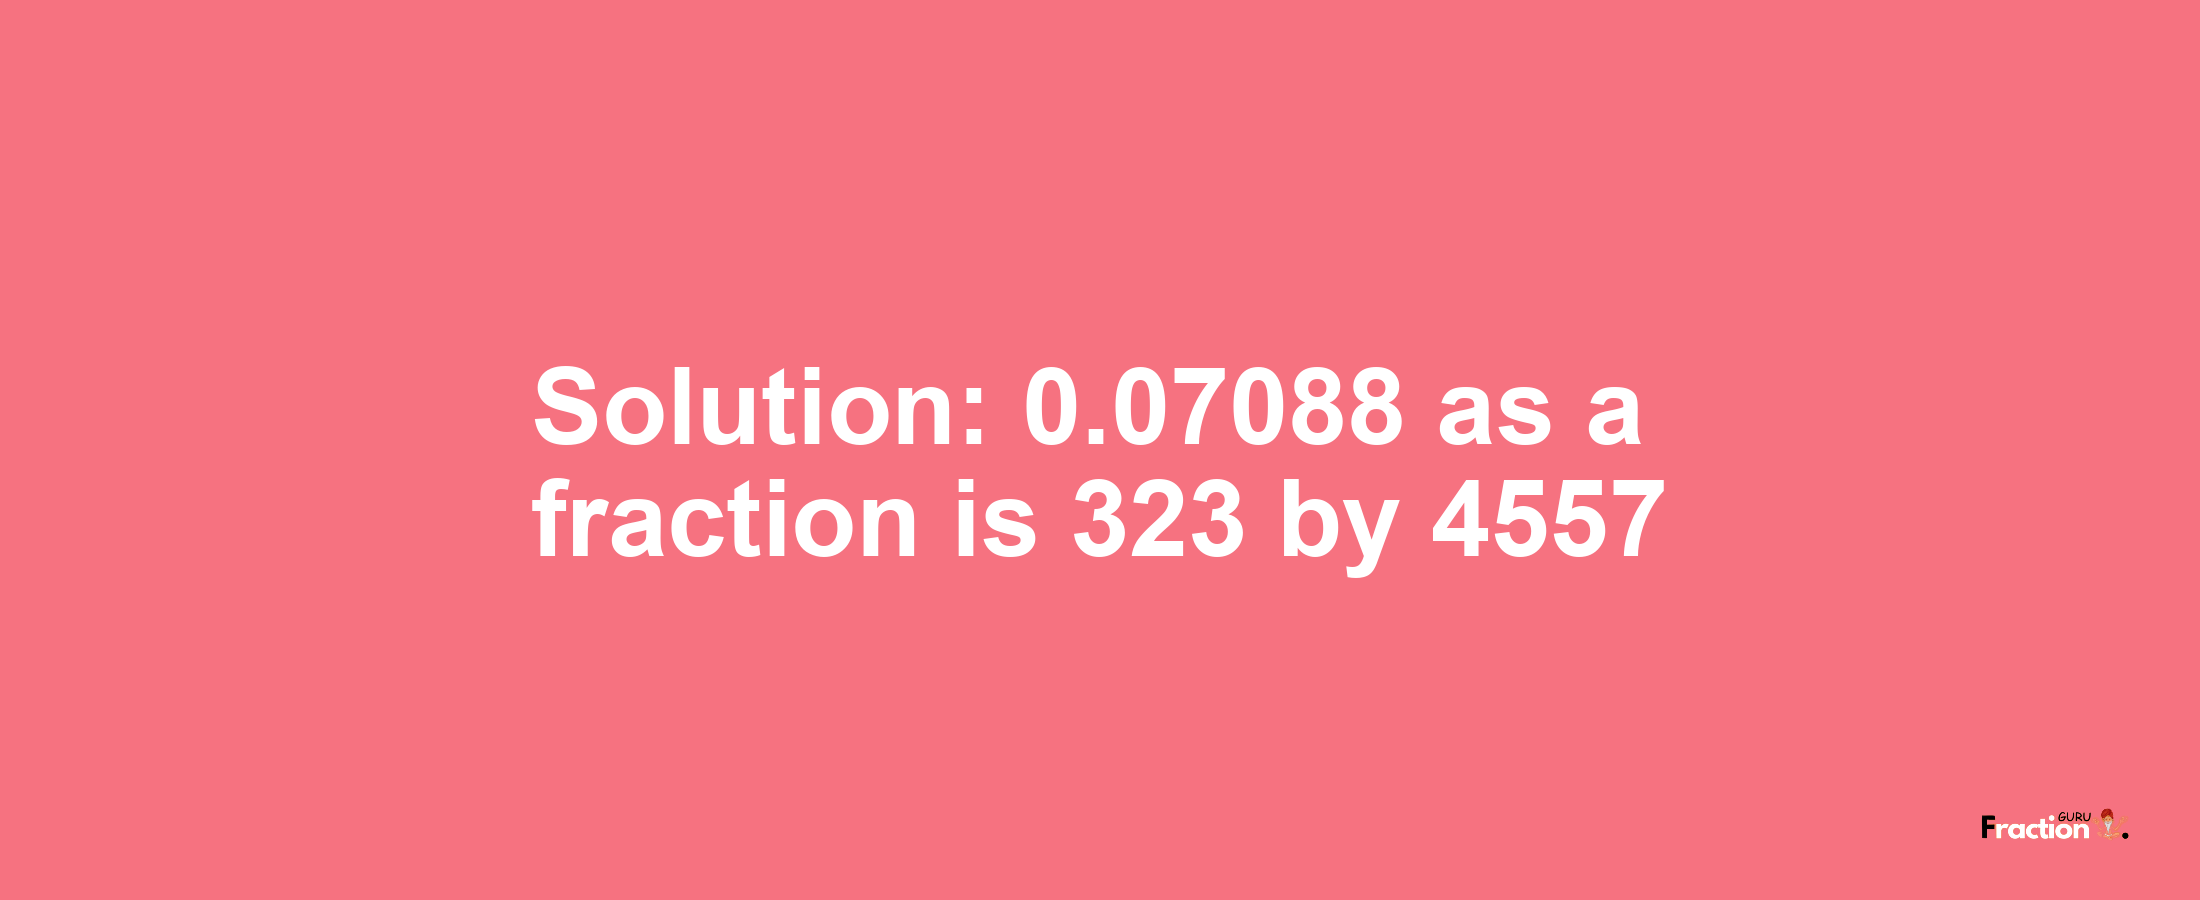 Solution:0.07088 as a fraction is 323/4557